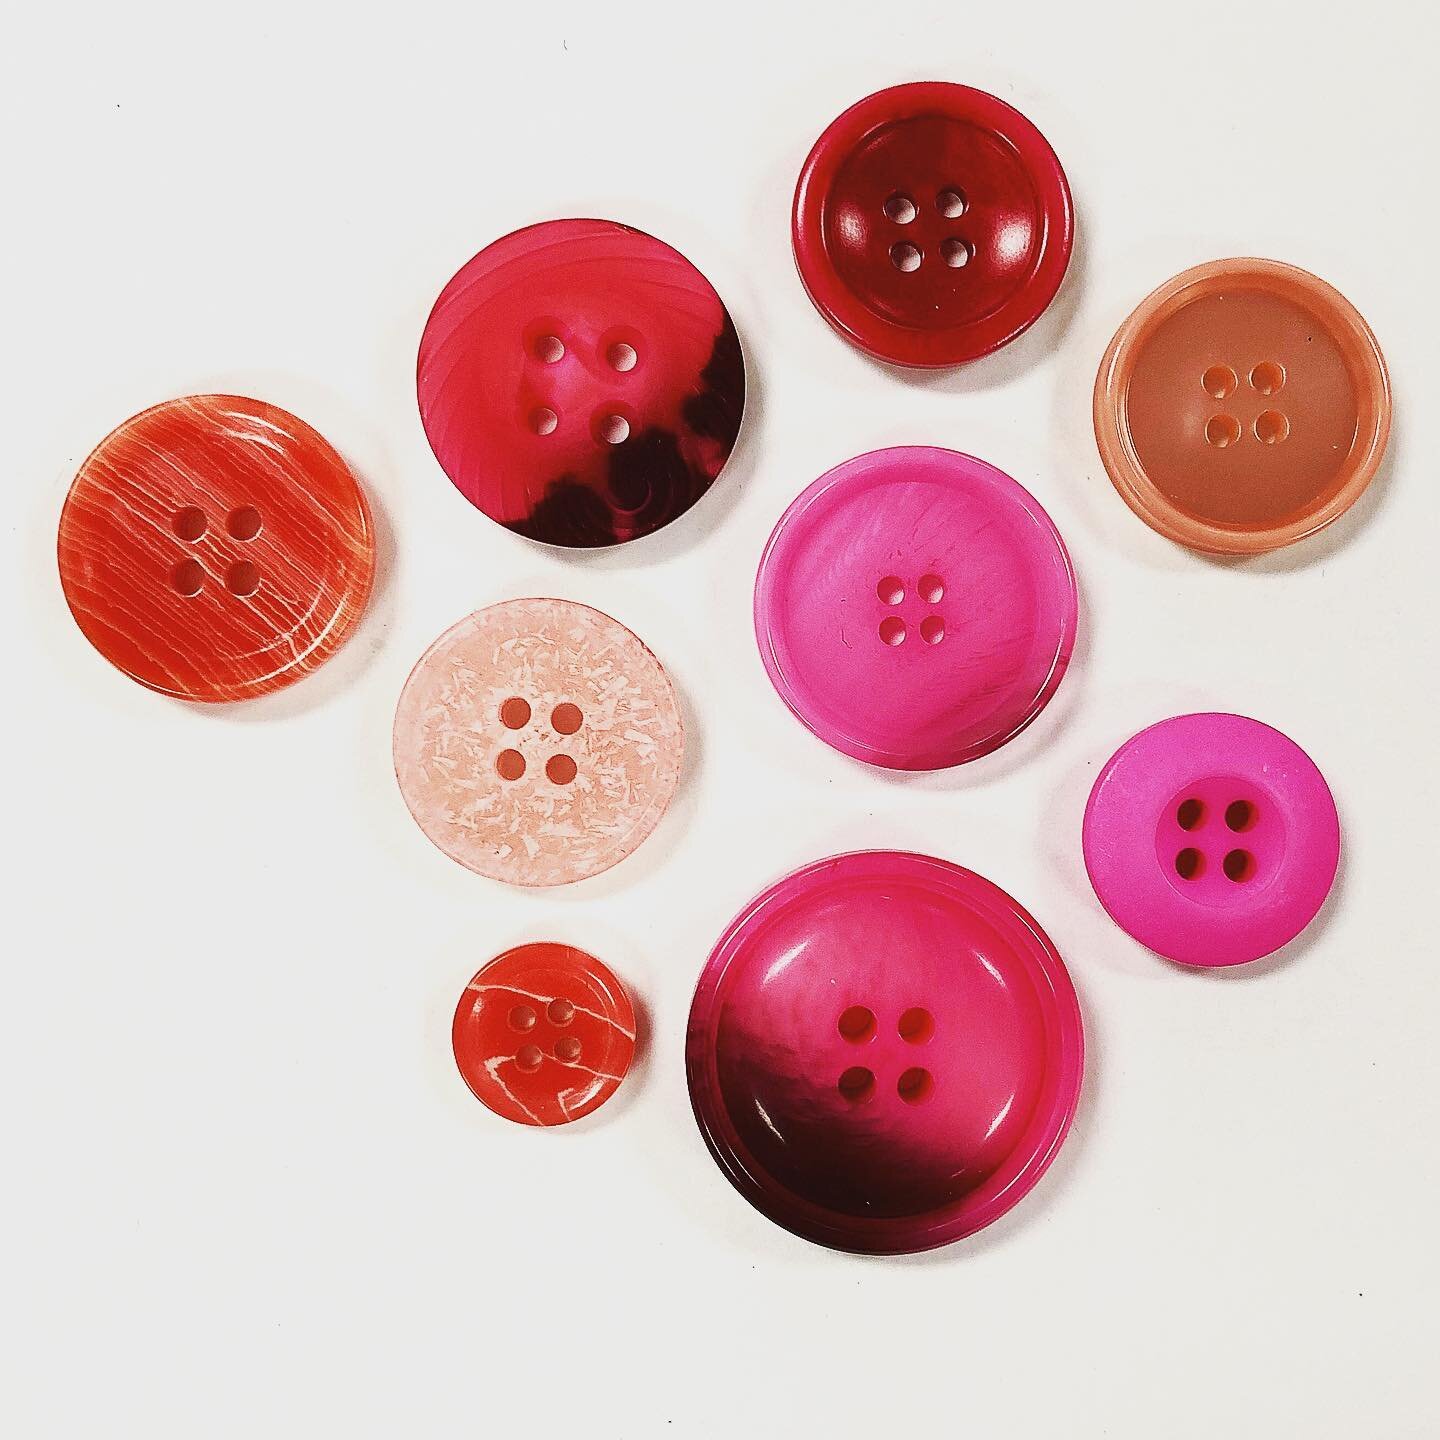 Outrageous Pink &mdash; one of our new trends for FW21/22 💗💗💗
.
.
.
.
#button #buttons #fashion #trims #newproduct #fall #prefall #fashionweek #fashionphotography #fashionkilla #fashionista #clothing #apparel #photography #photo #photography #phot